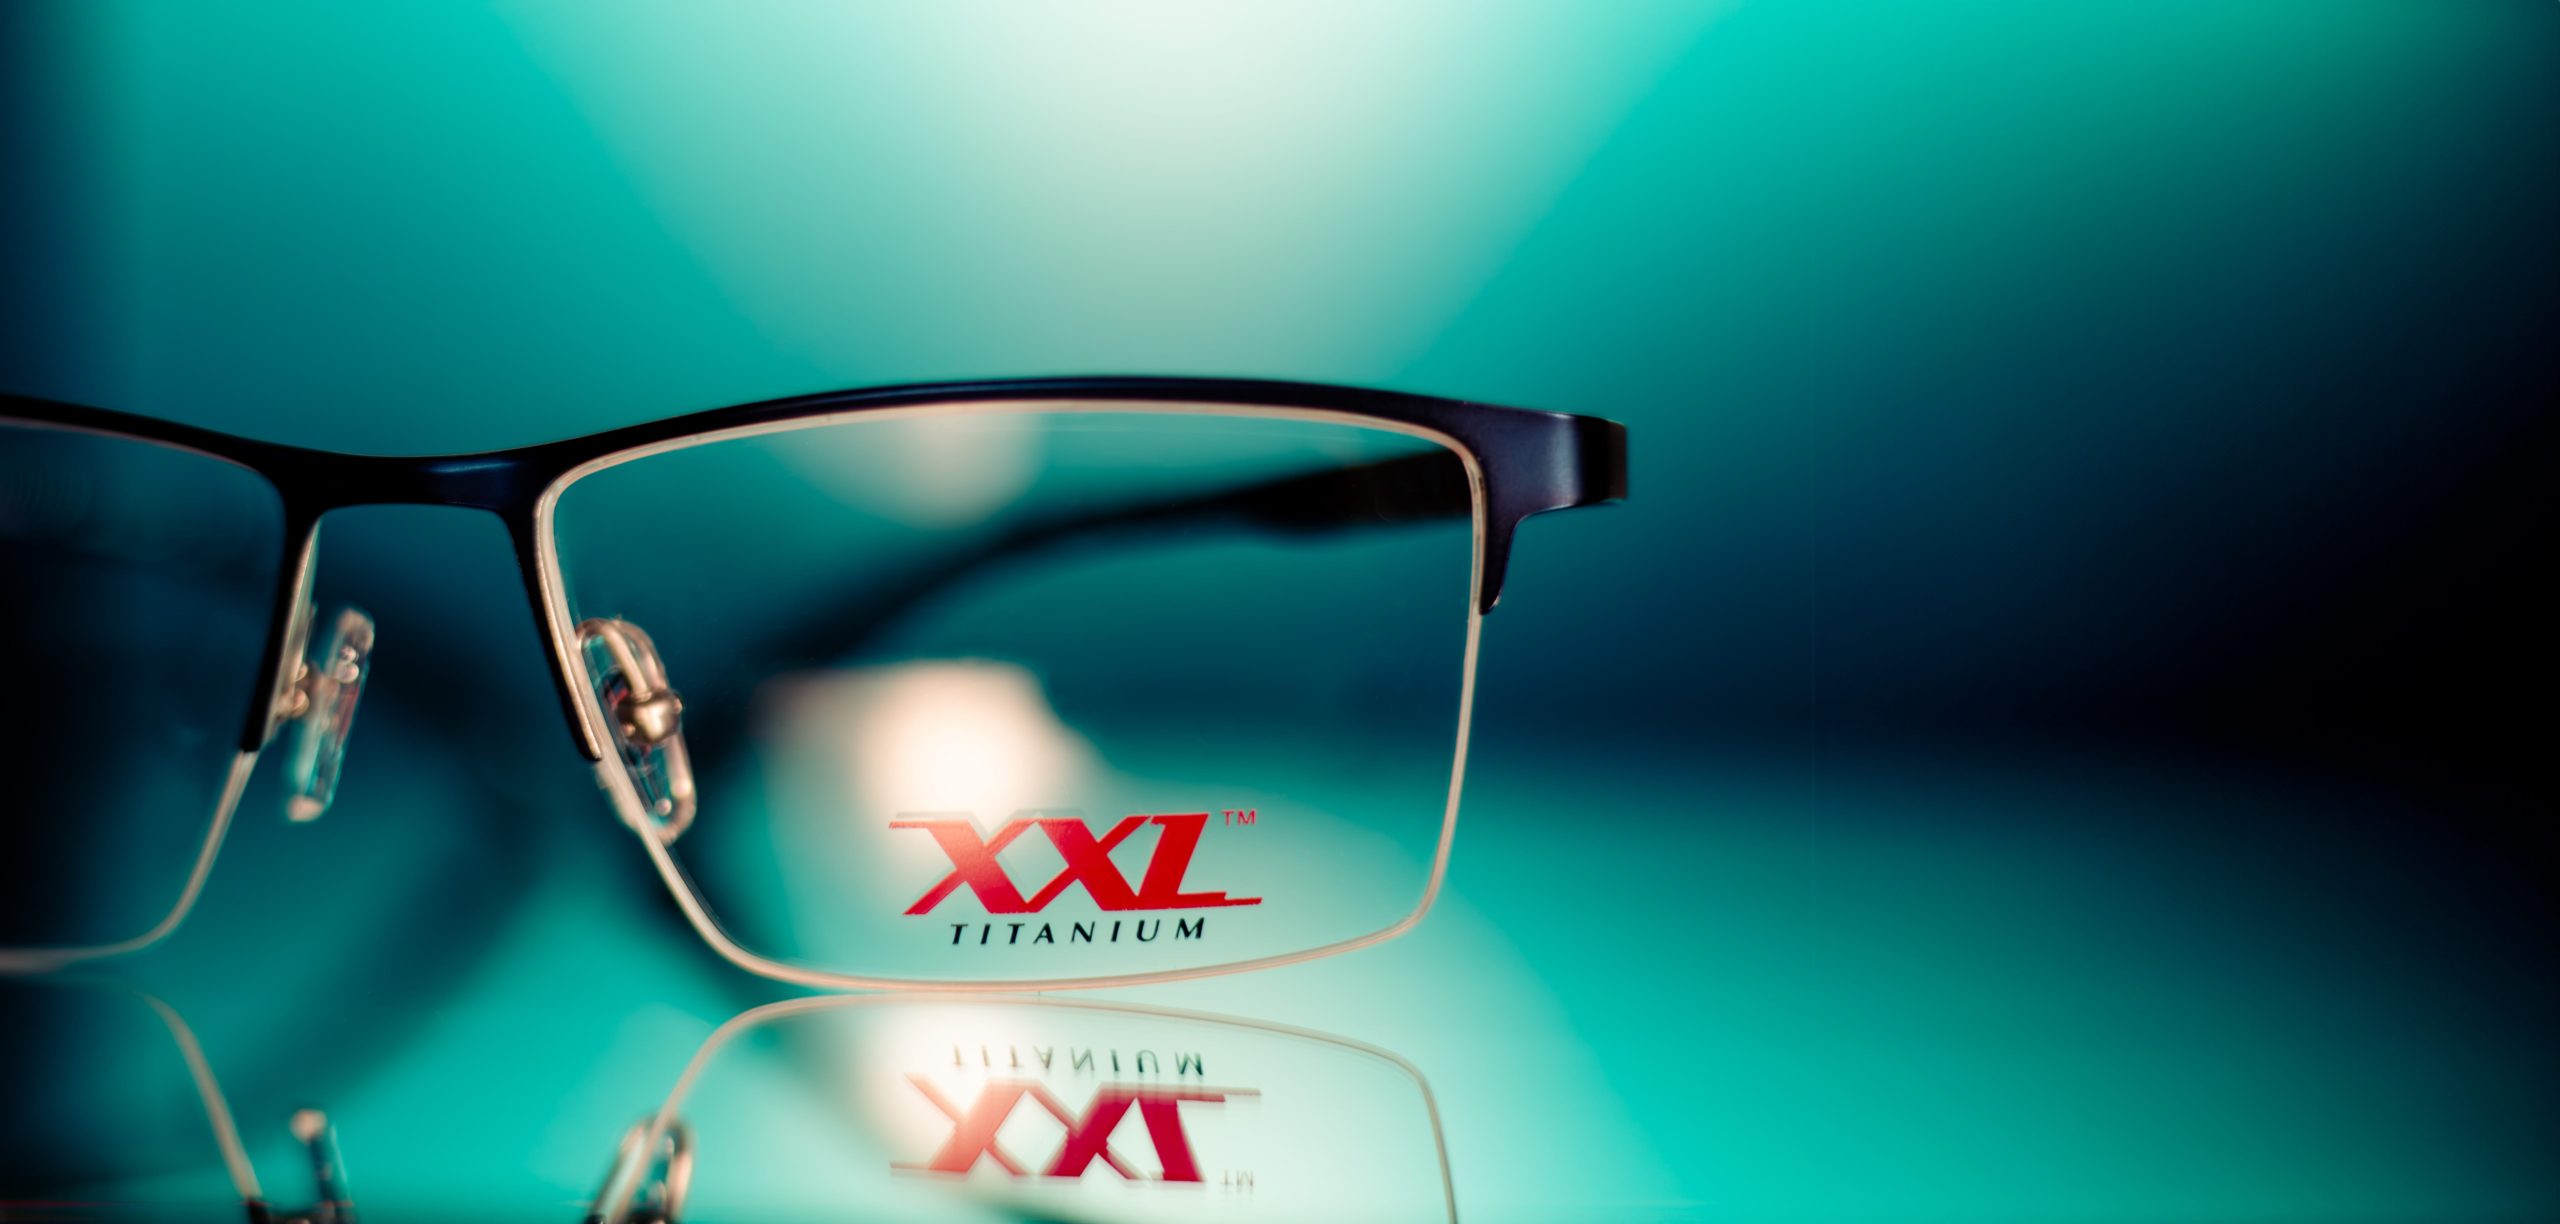 XXL frames on blue background and reflective surface